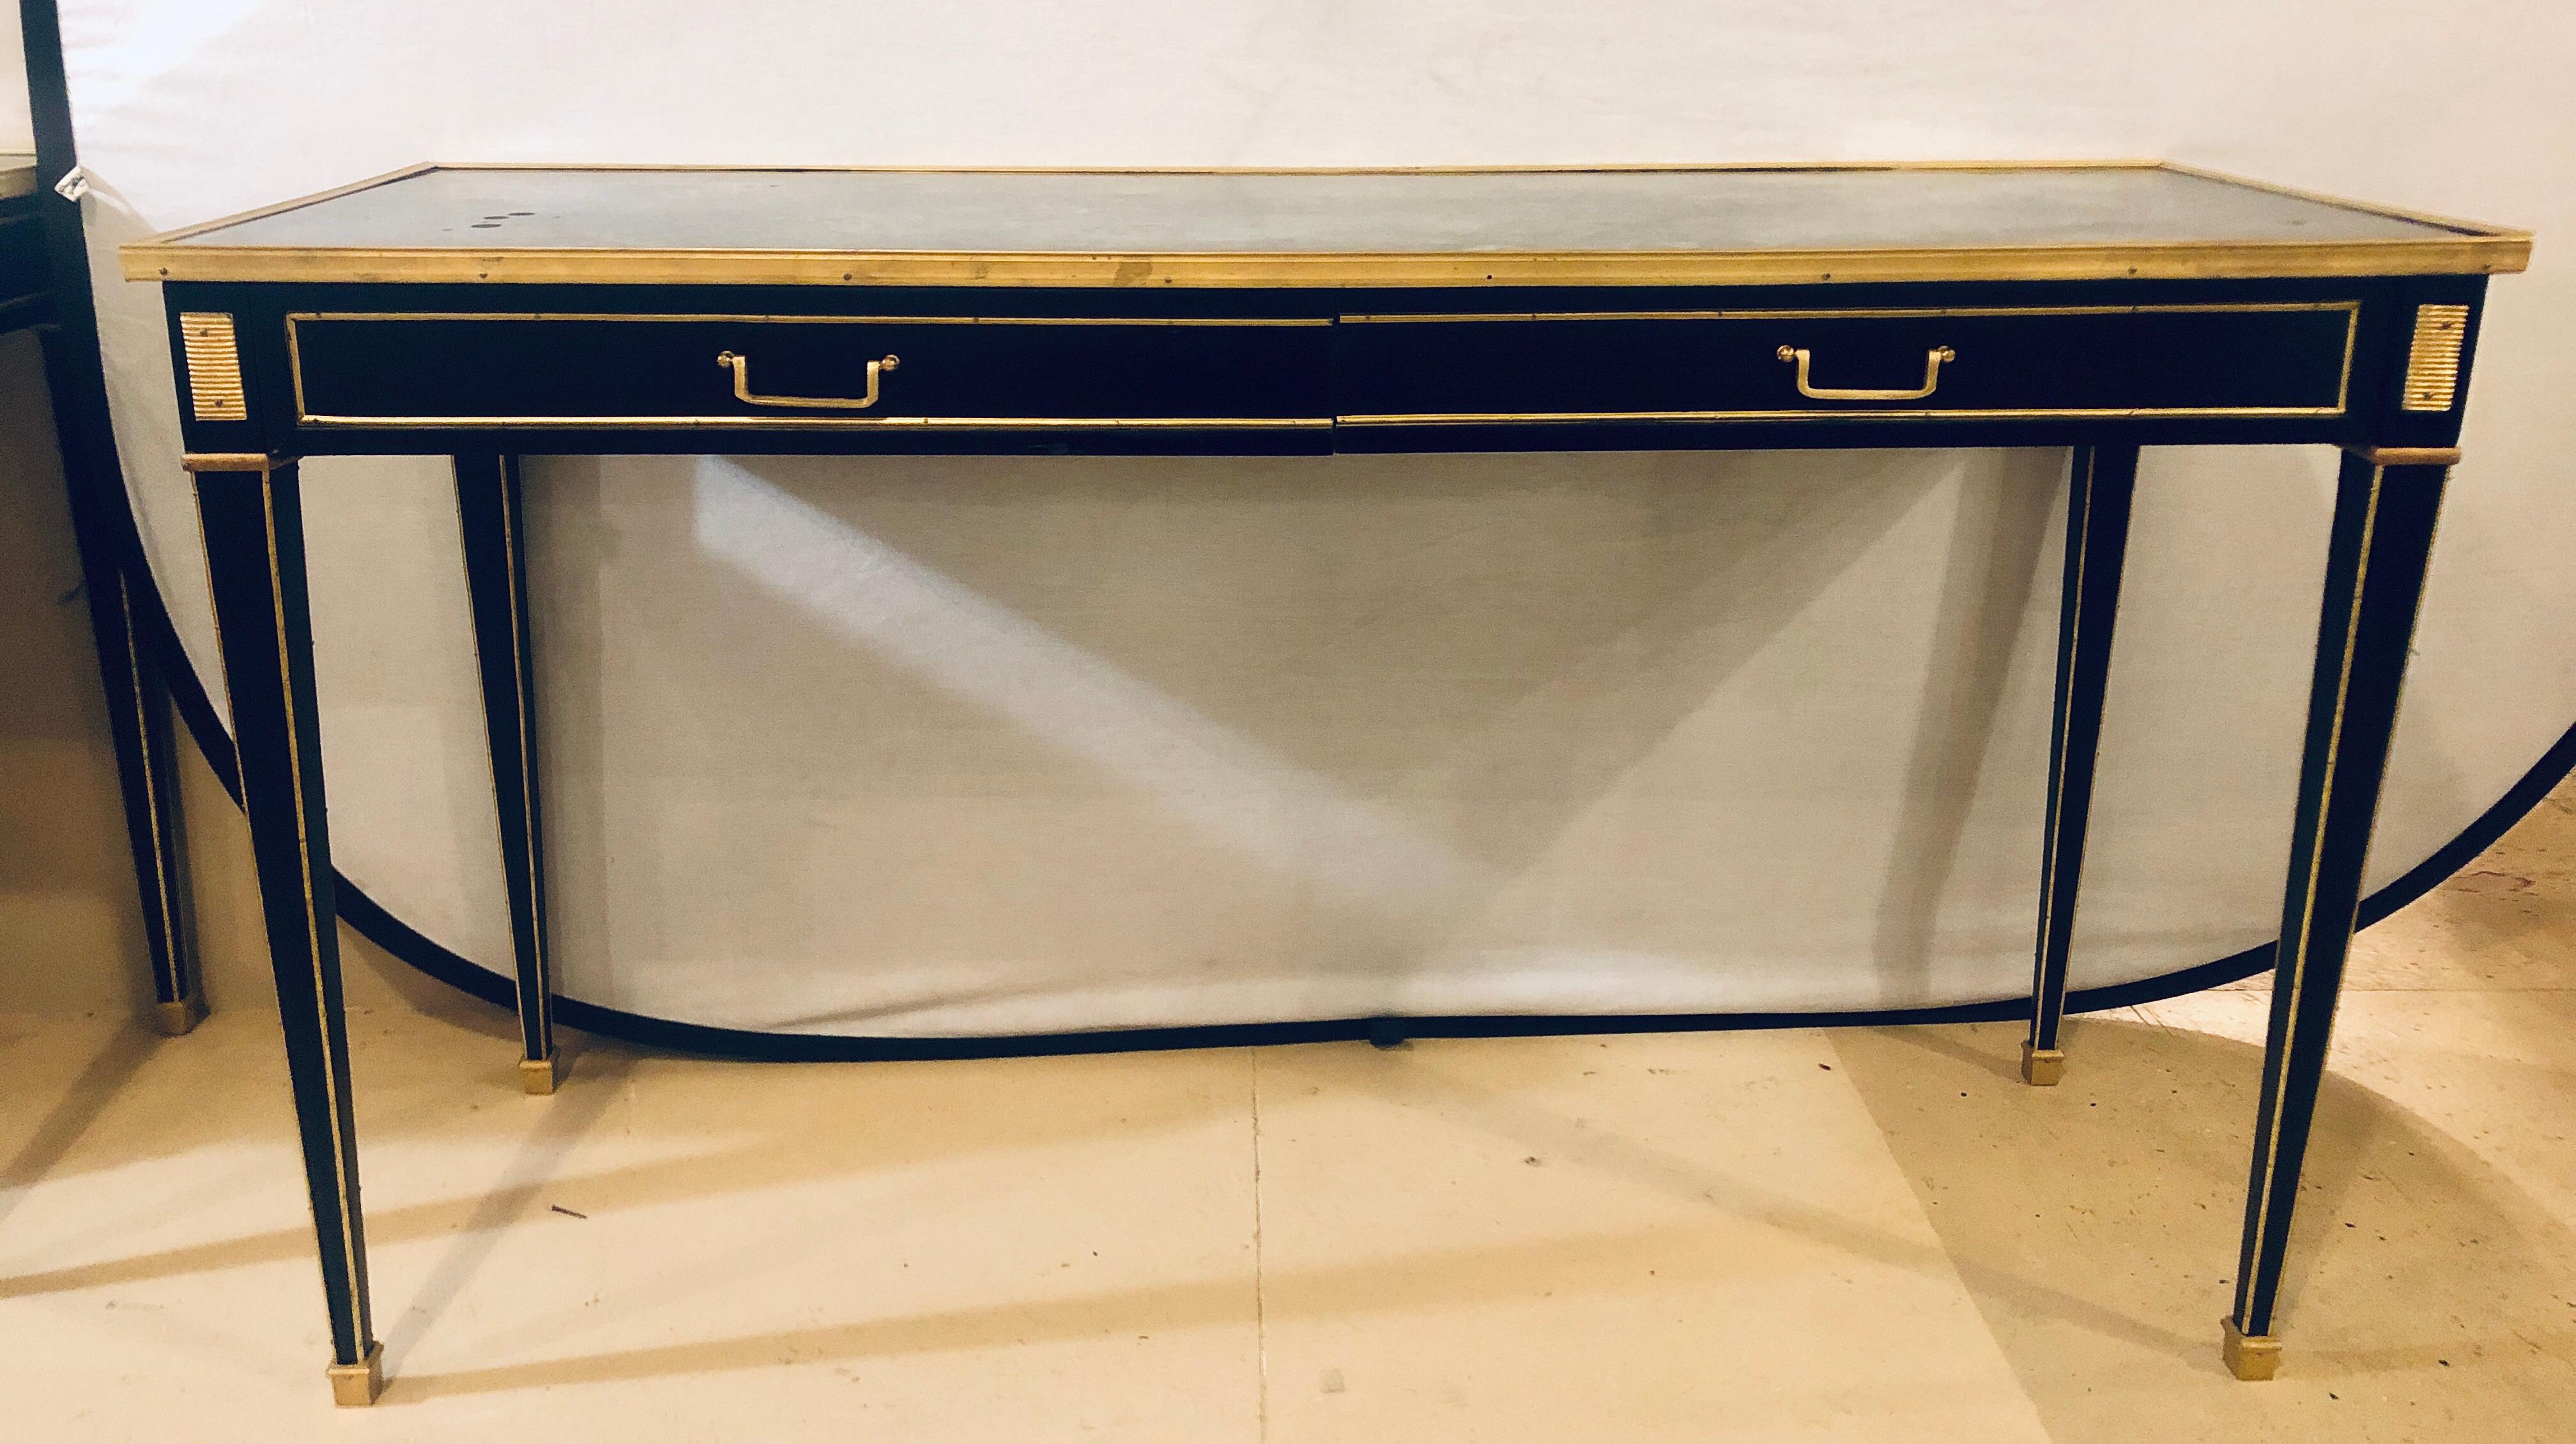 Pair of Ebony Maison Jansen style mirror top 2-drawer console with bronze mounts. Each having tapering legs with bronze mounts and cookie cutter corners. Each with an antiqued mirror top.
joy.